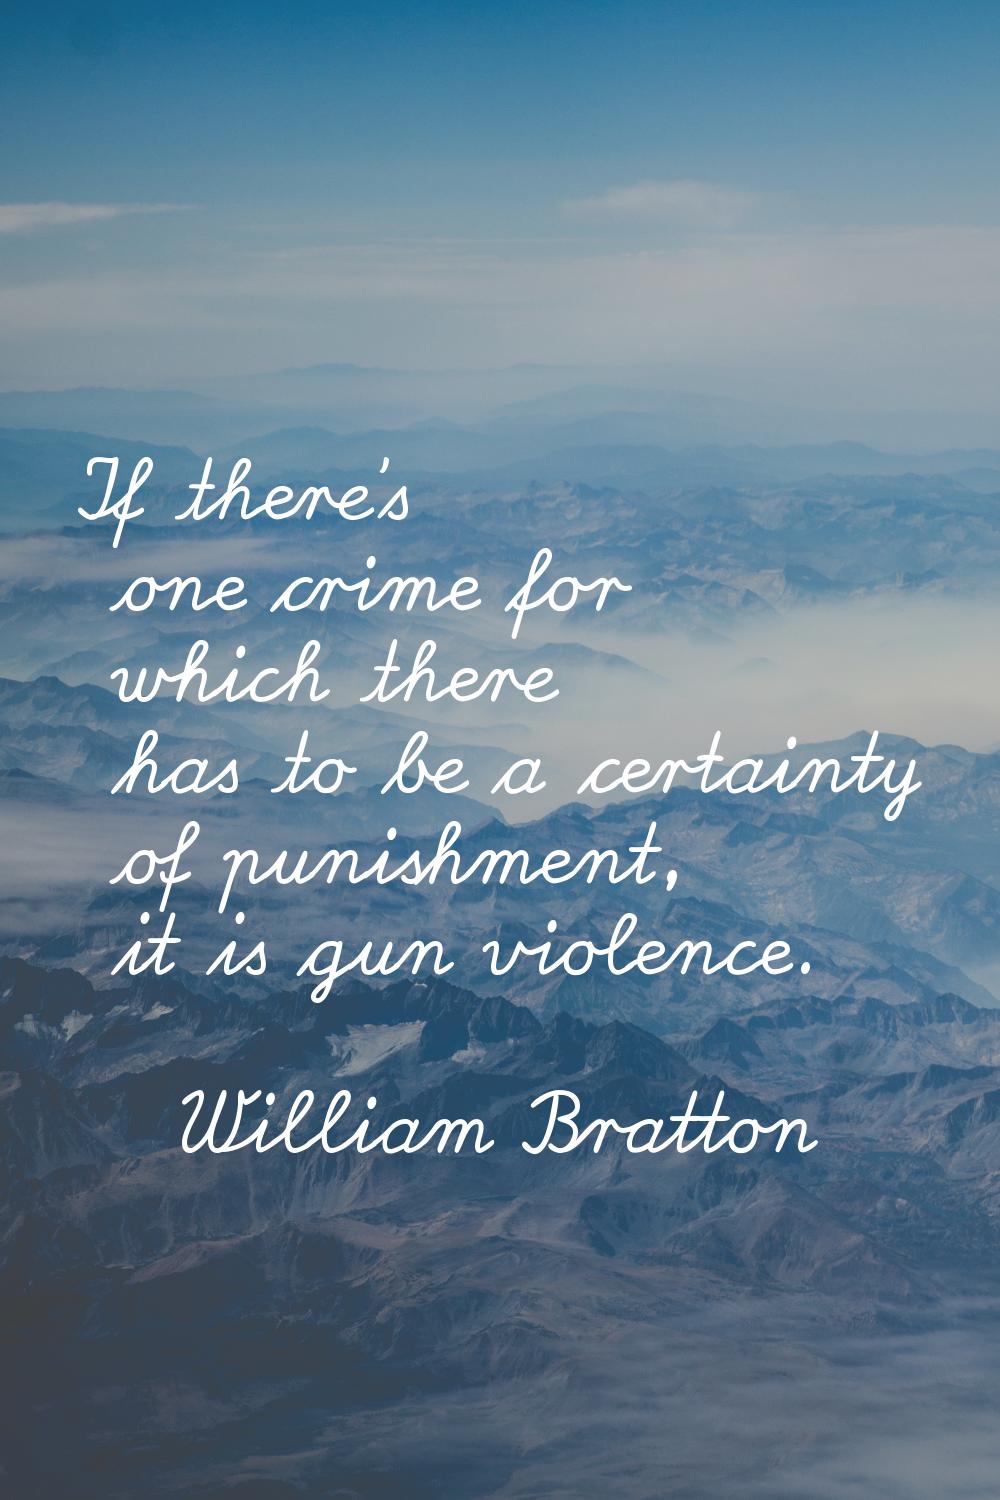 If there's one crime for which there has to be a certainty of punishment, it is gun violence.